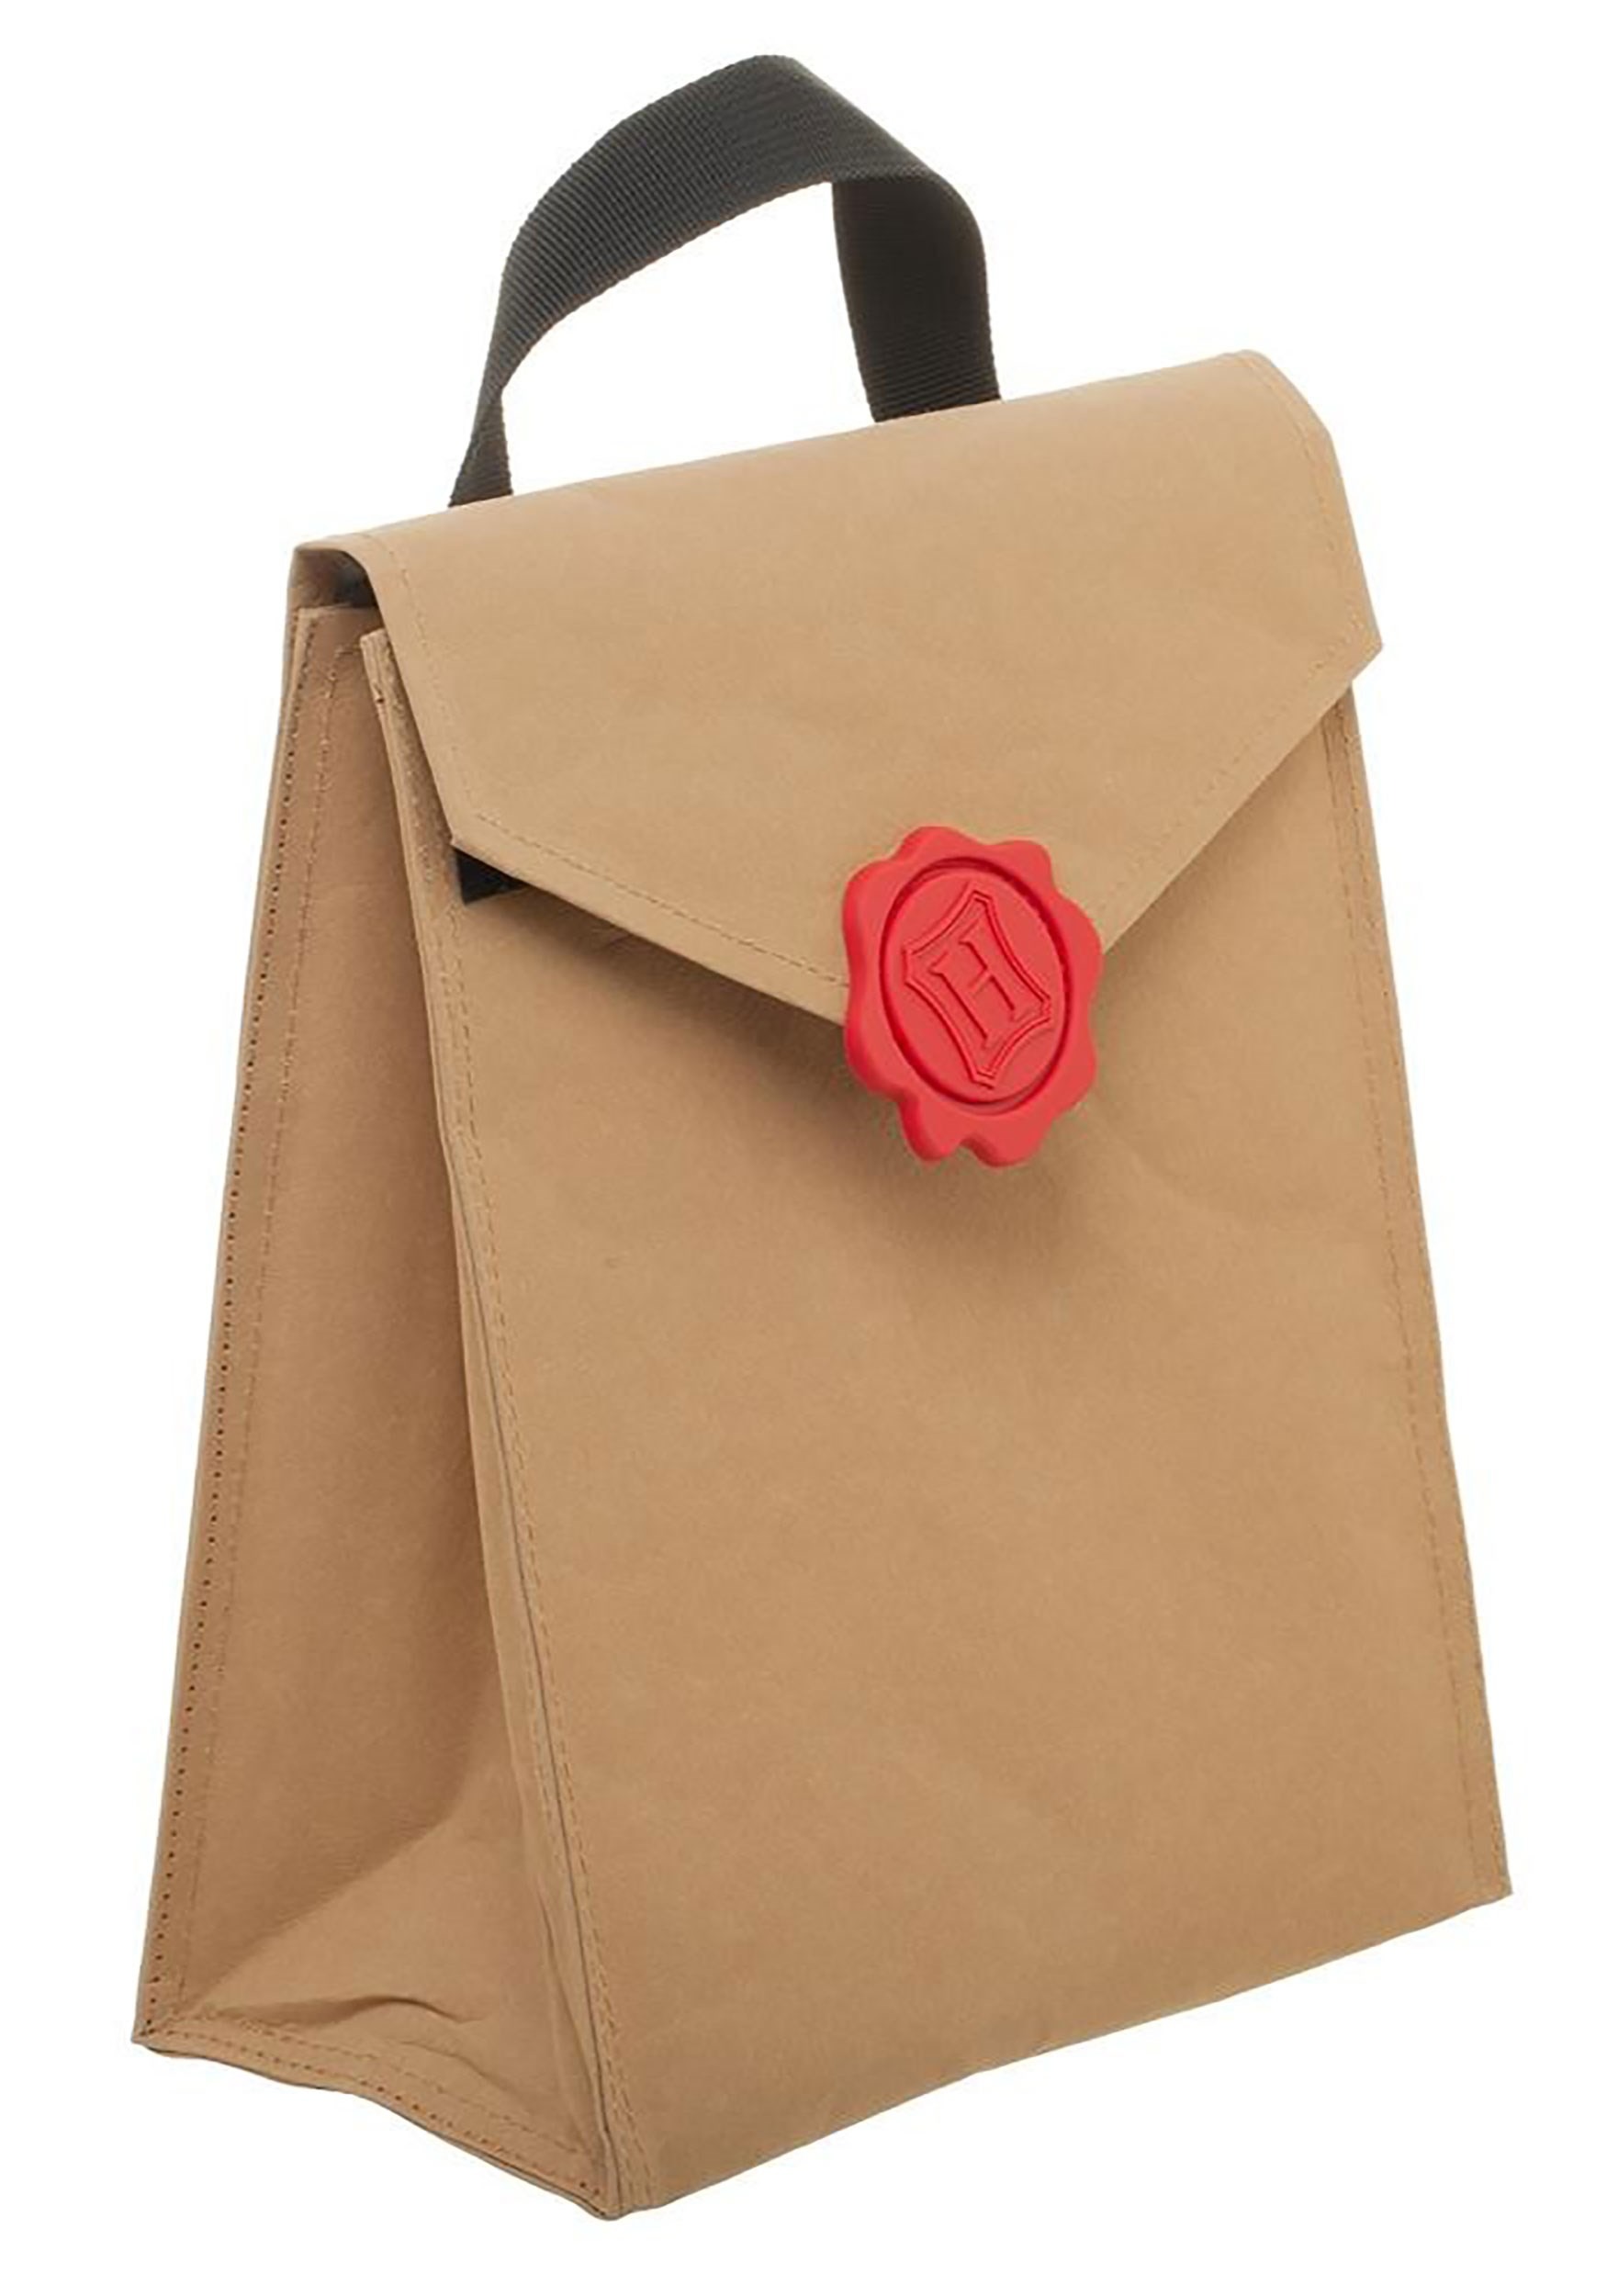 Harry Potter - Insulated Lunch Sack